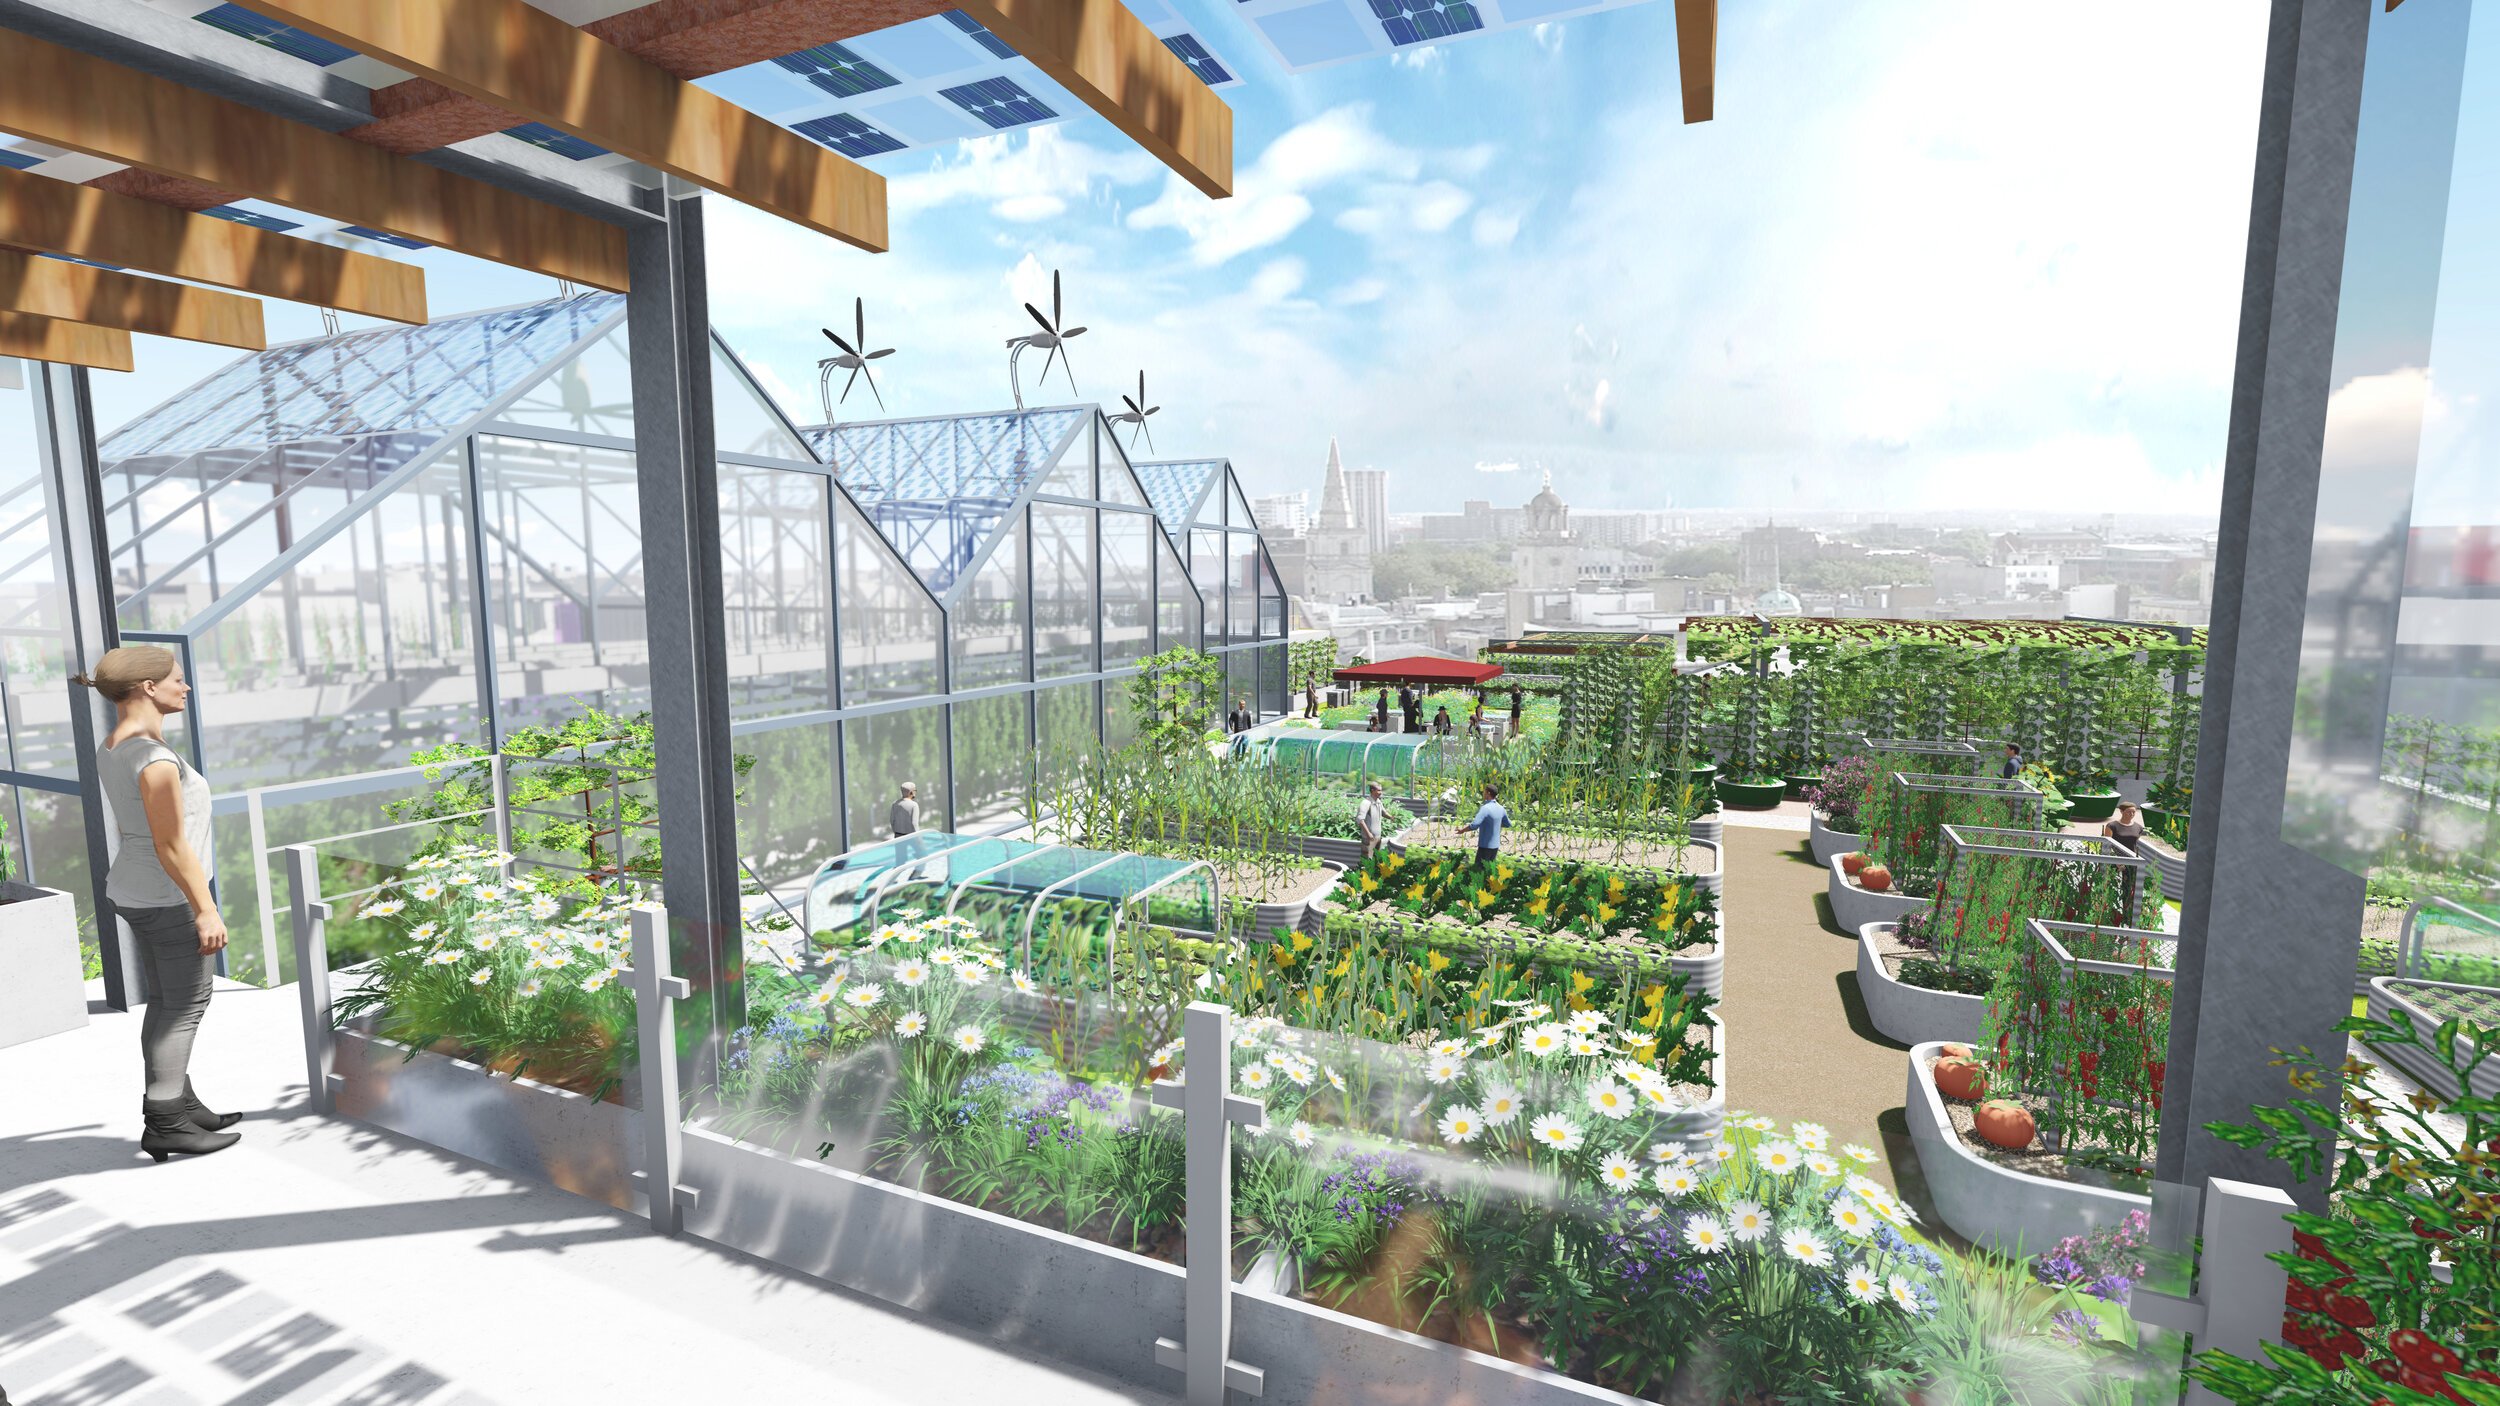 A rendering of the view of the Future City Food Hub’s rooftop